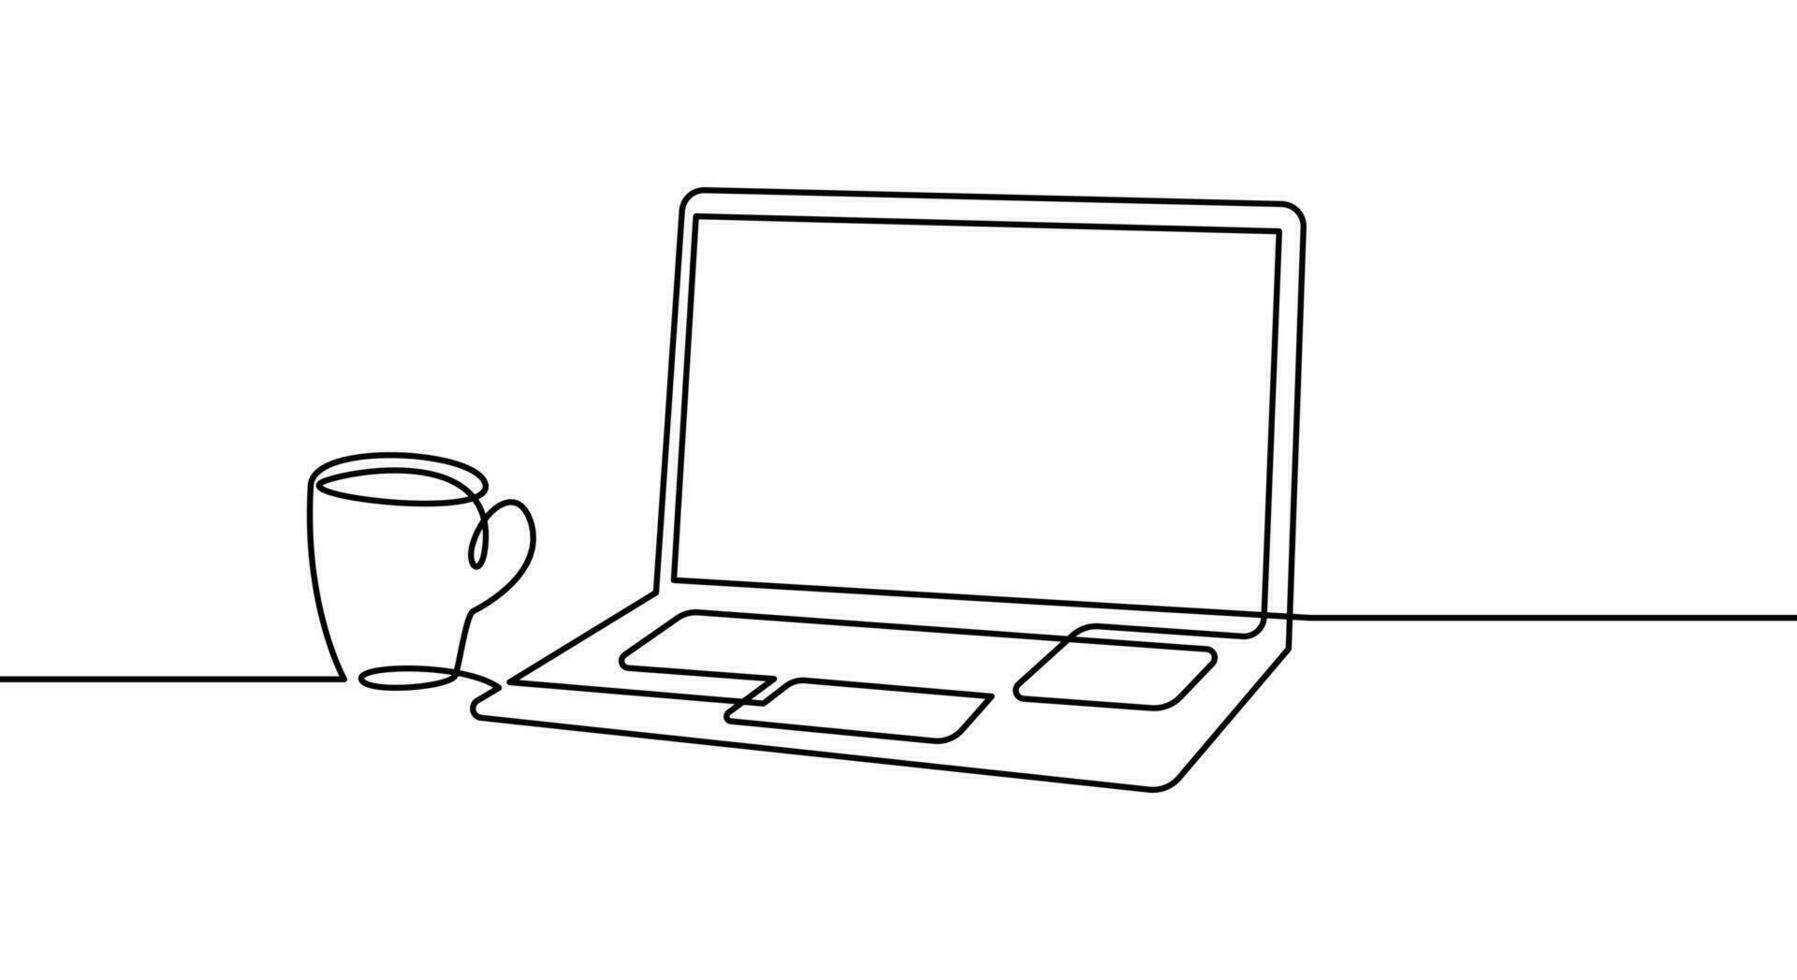 Continuous line drawing of a laptop and a cup of coffee or tea. Vector linear icon illustration